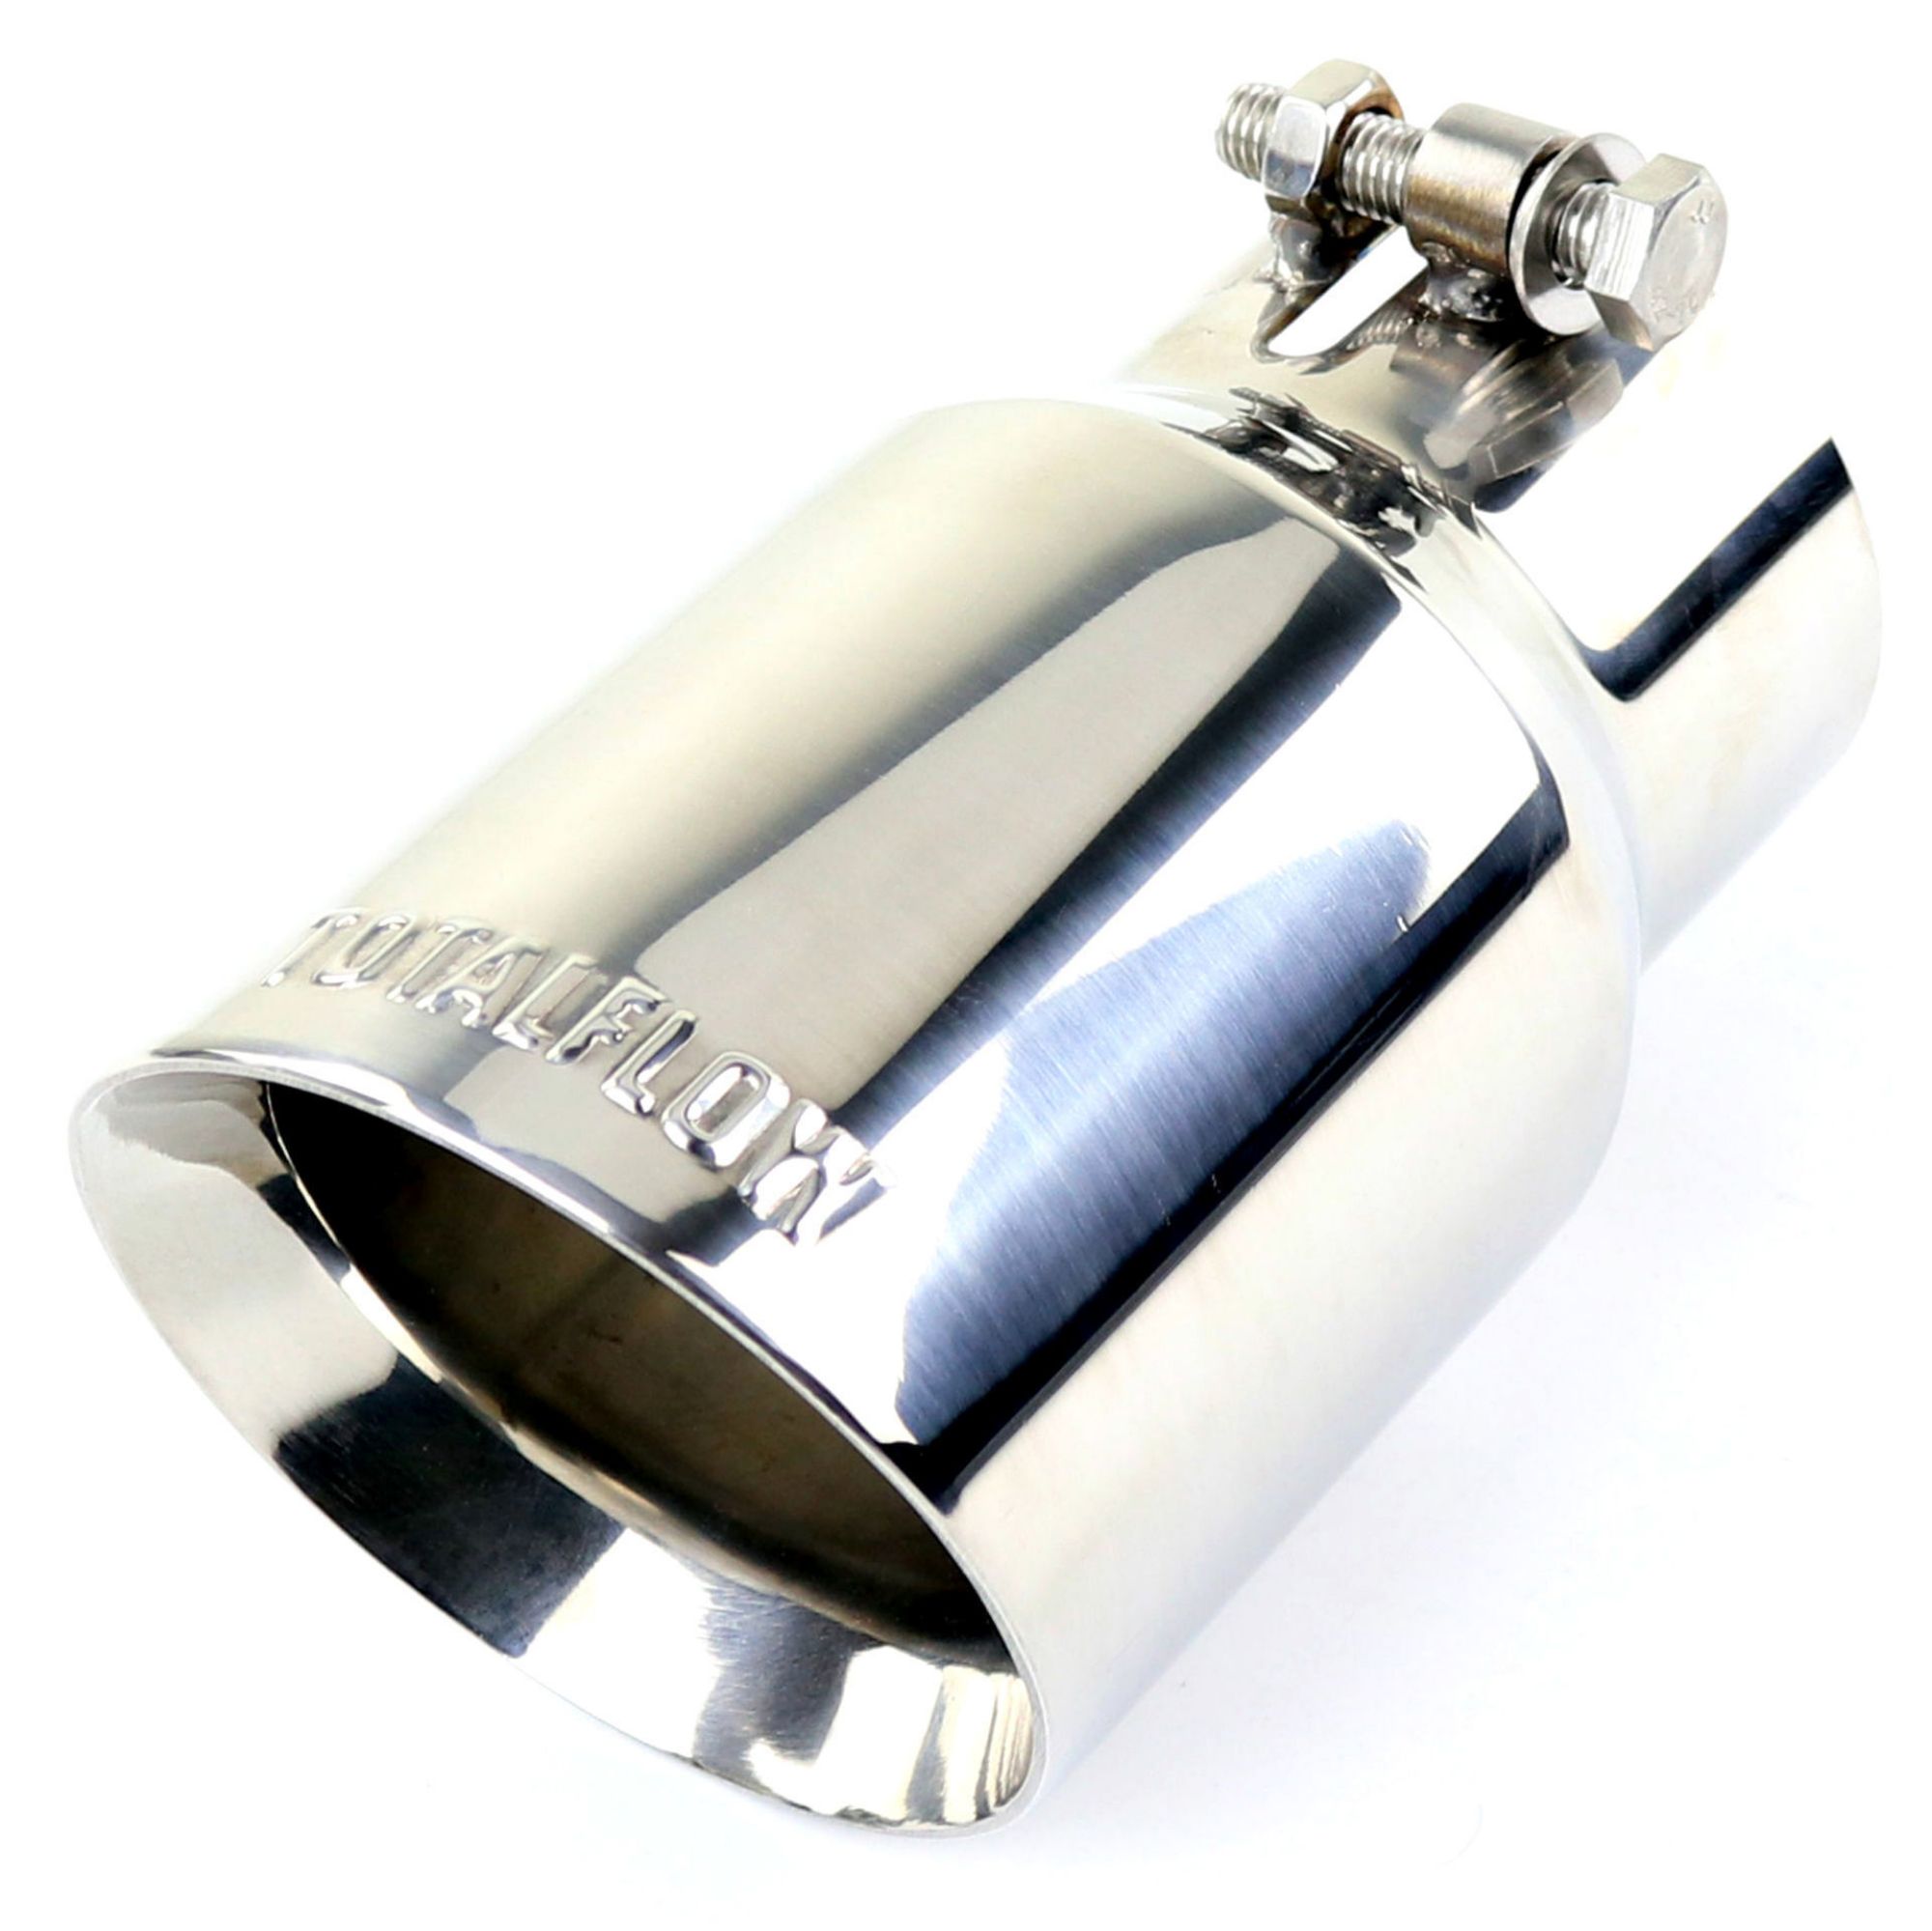 TOTALFLOW 4735P Universal 3 1/2 Inch Bolt-On Double Wall 3.5" Inch Exhaust Tip - Polished Finish